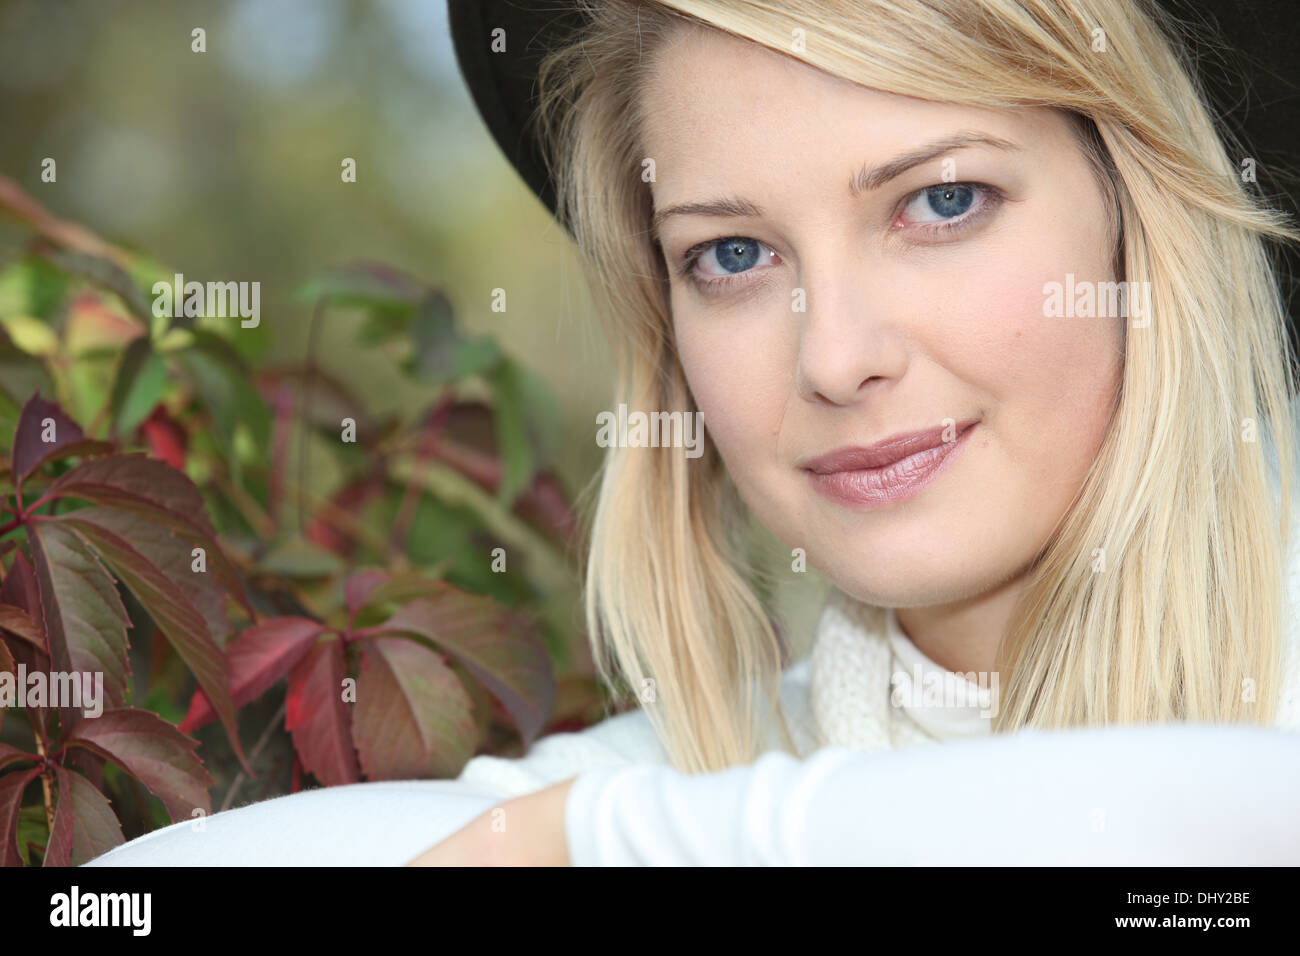 Portrait of a blond-haired woman Stock Photo